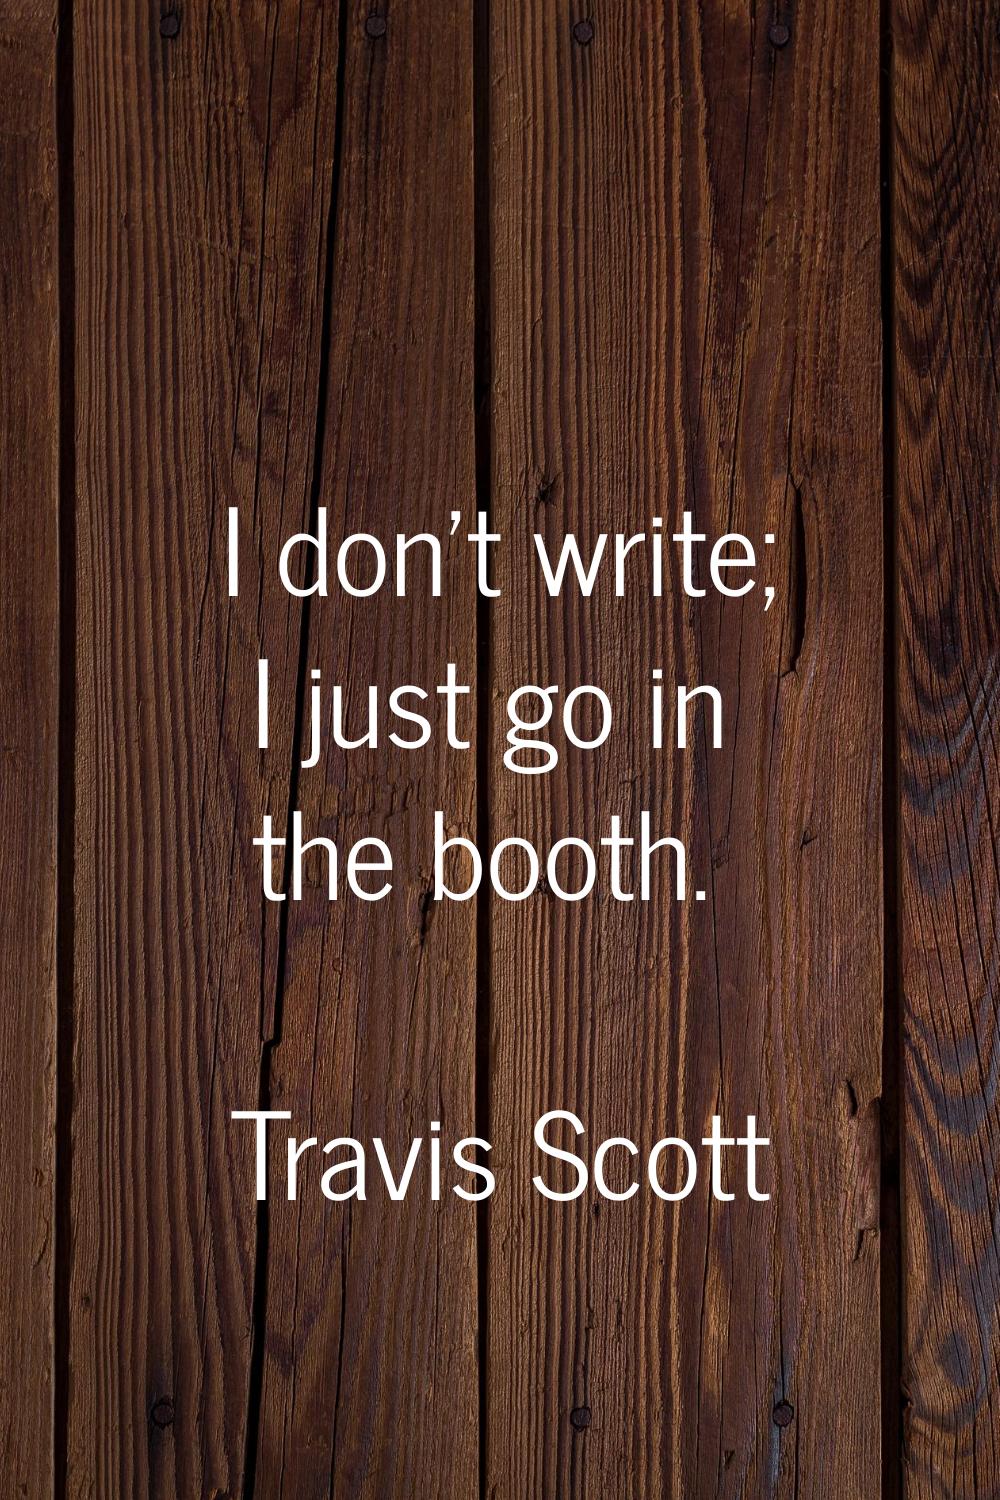 I don't write; I just go in the booth.